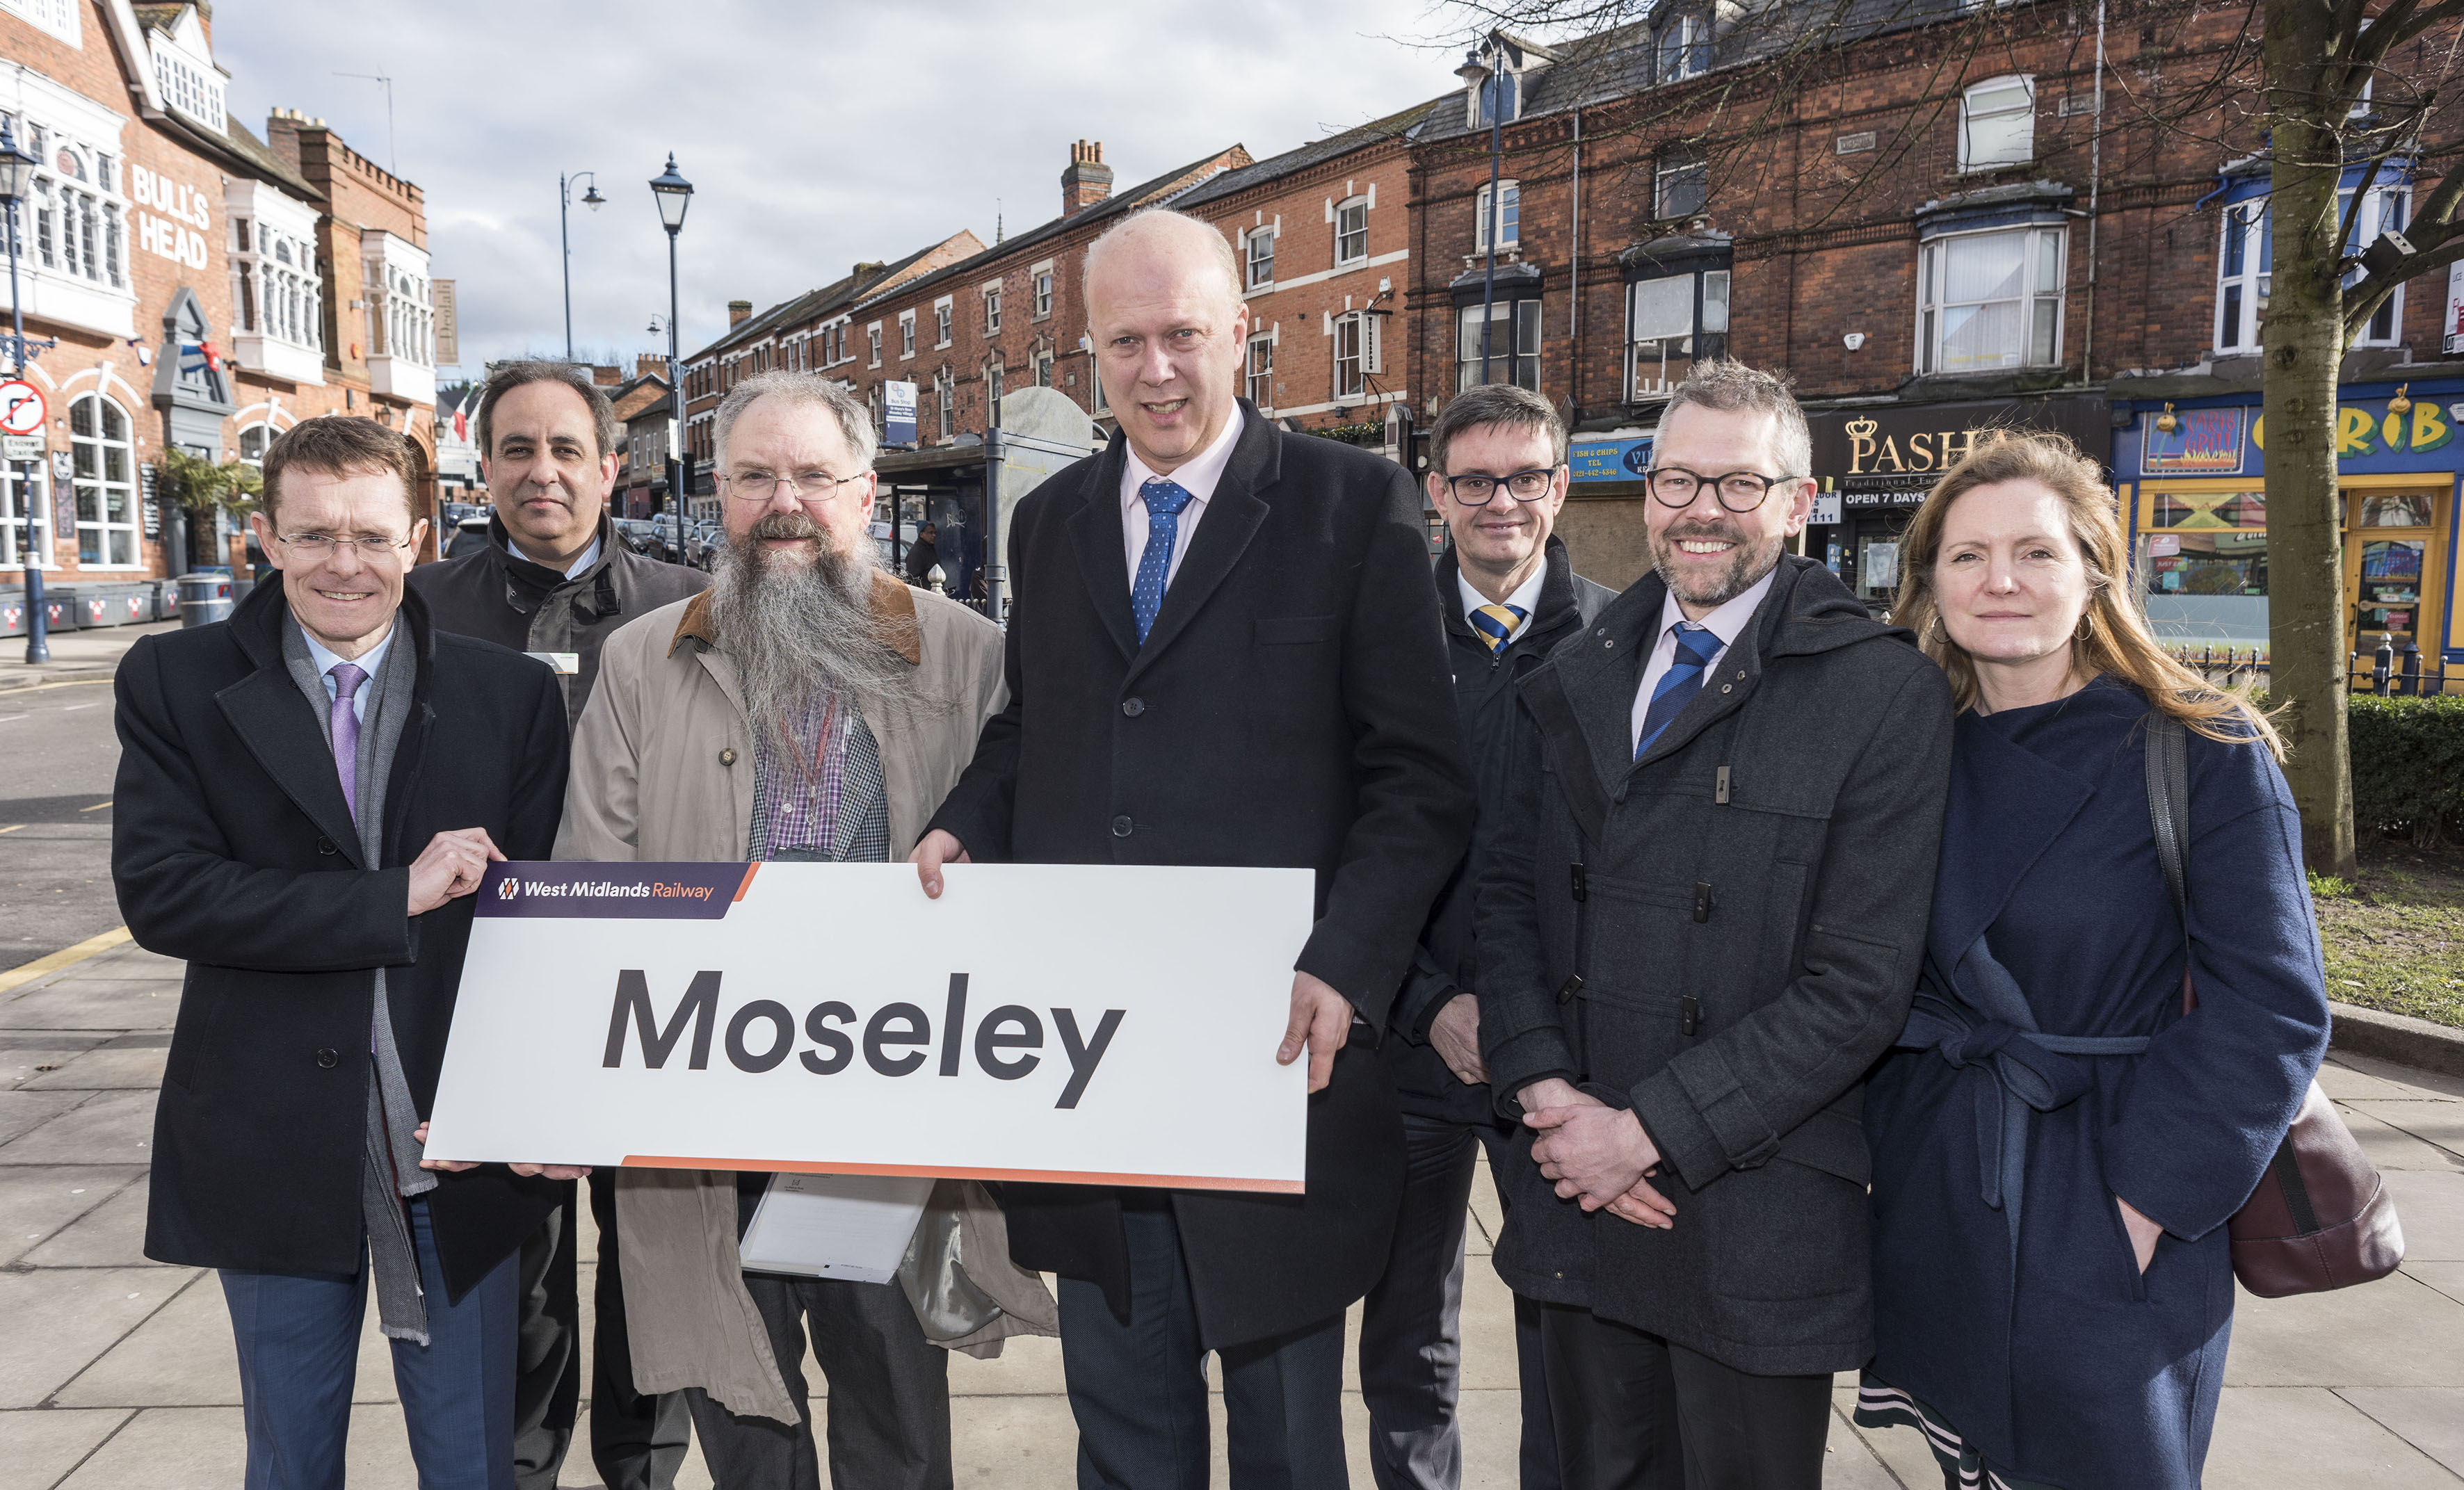 Mayor of the West Midlands Andy Street, left, Jan Chaudhry, managing director of West Midlands Railway, Cllr Stewart Stacey, Cabinet Member for Transport and Roads on Birmingham City Council, Chris Grayling MP, Martin Frobisher, Route Managing Director of Network Rail, Malcolm Holmes, TfWM Rail Director, and Laura Shoaf, managing director of TfWM, in Moseley.